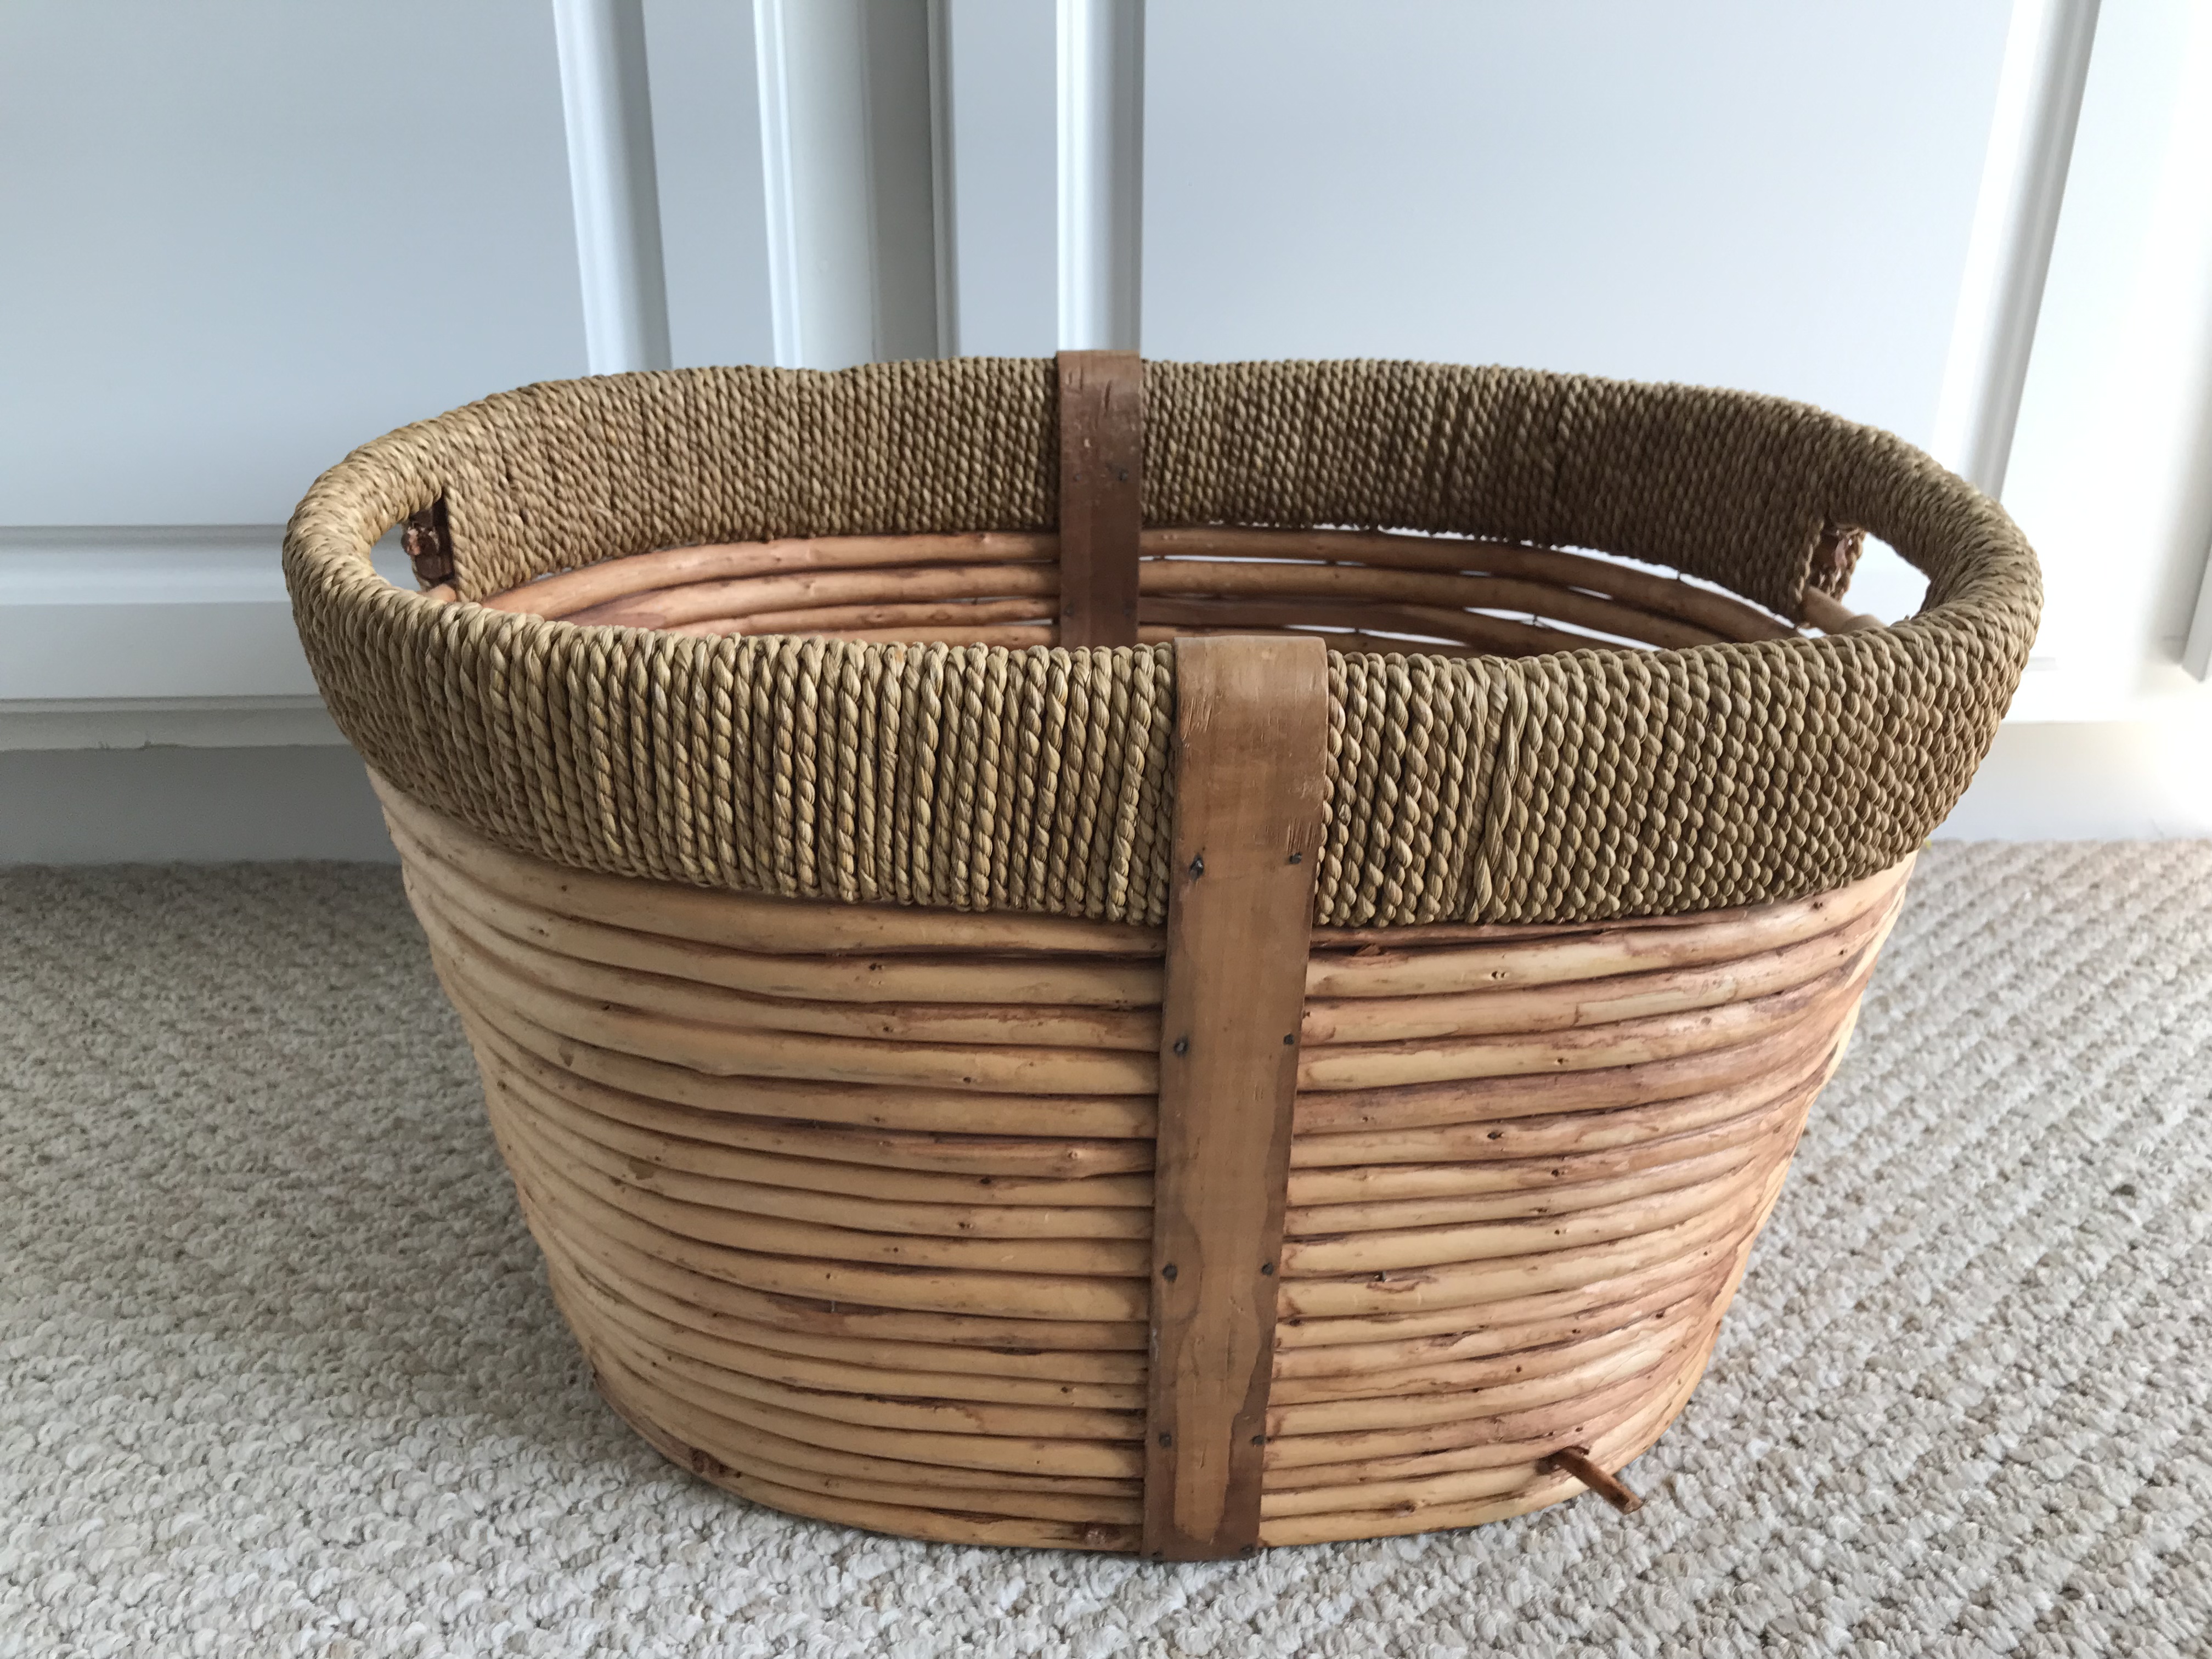 Used     1 Used Wooden Basket